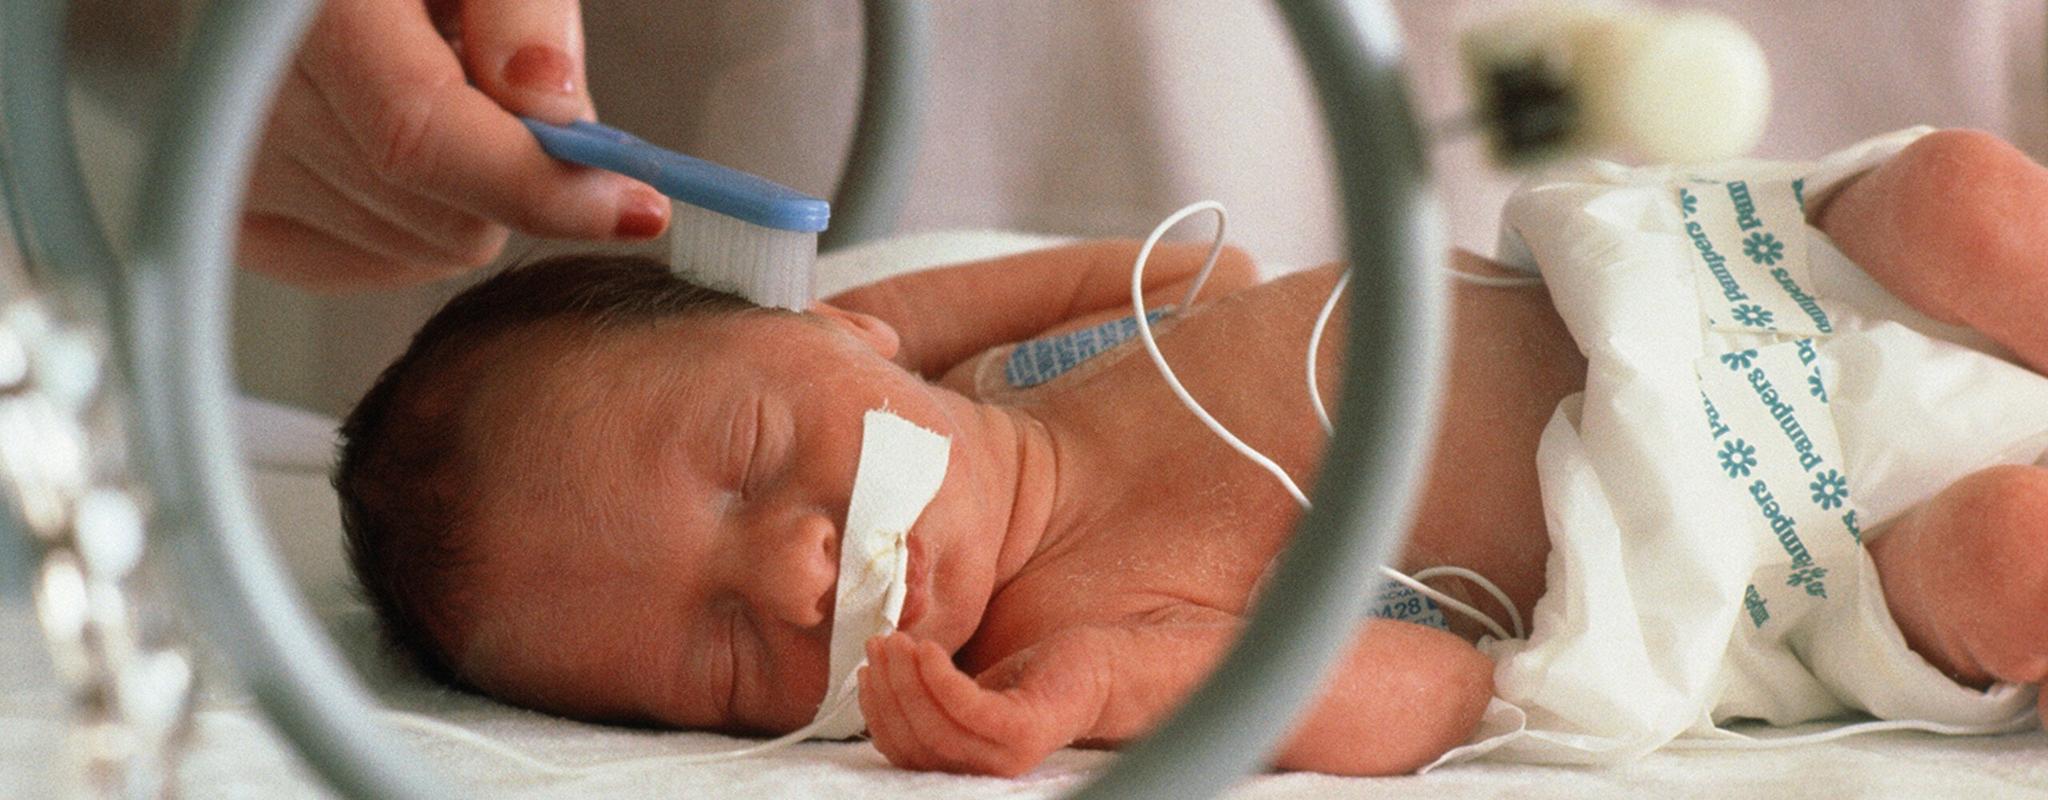 A premature baby lies in an incubator and has their hair brushed with a toothbrush